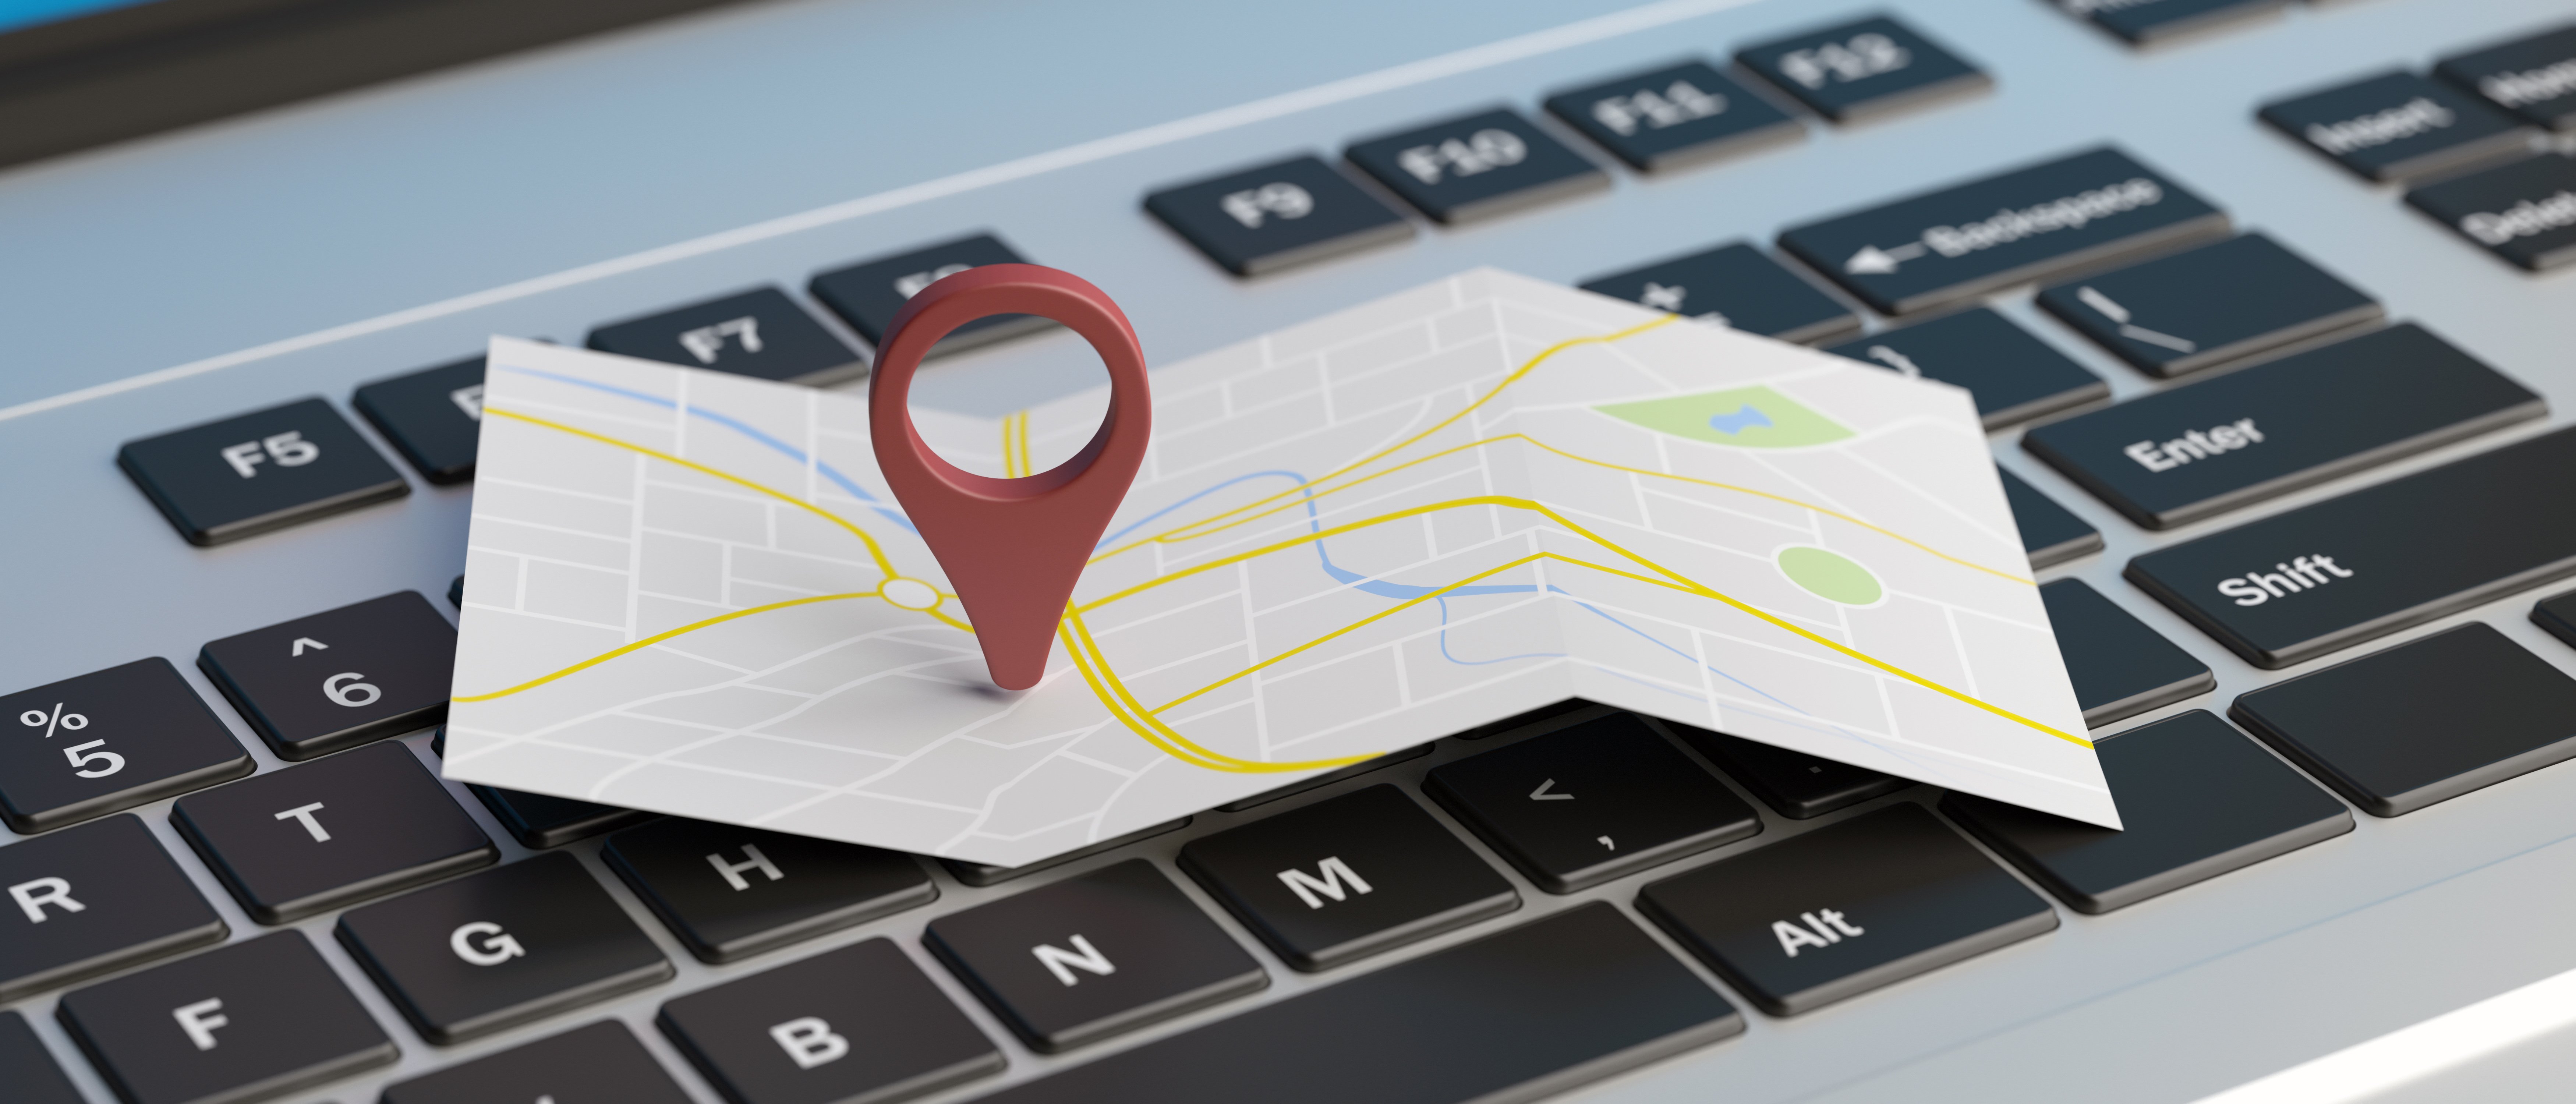 Marketers can use location data to measure the efficacy of location-targeted campaigns